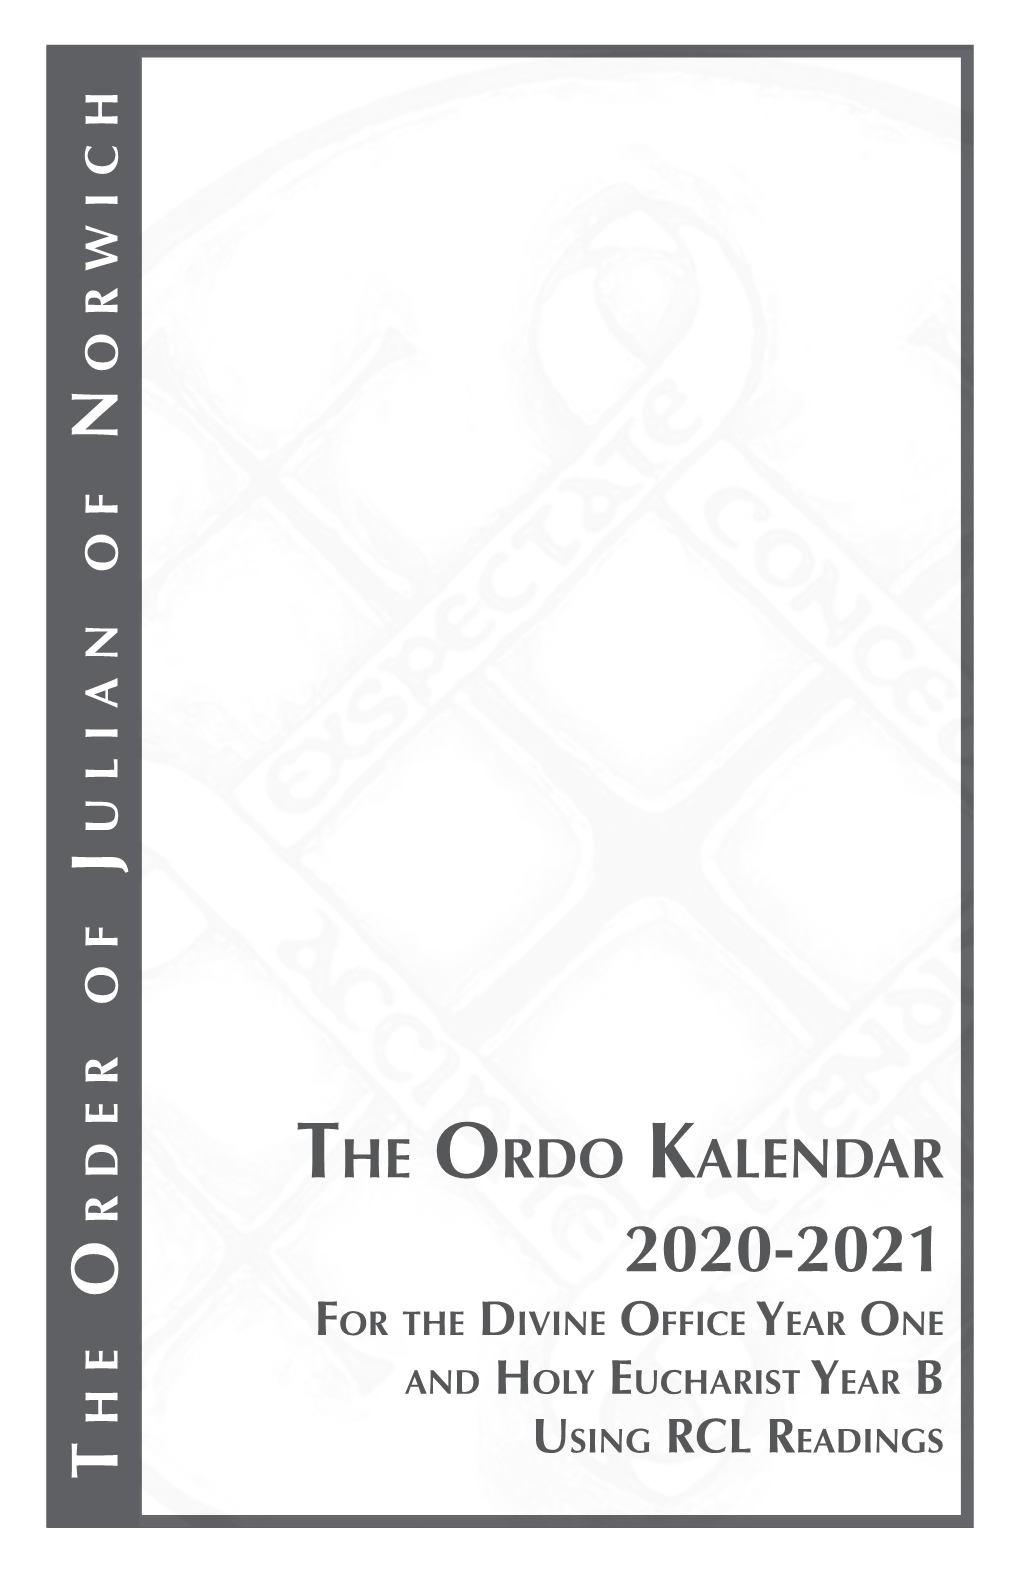 The Ordo Kalendar 2020-2021 for the Divine Office Y Ear One and Holy Eucharist Y Ear B Using Rcl Readings Introduction